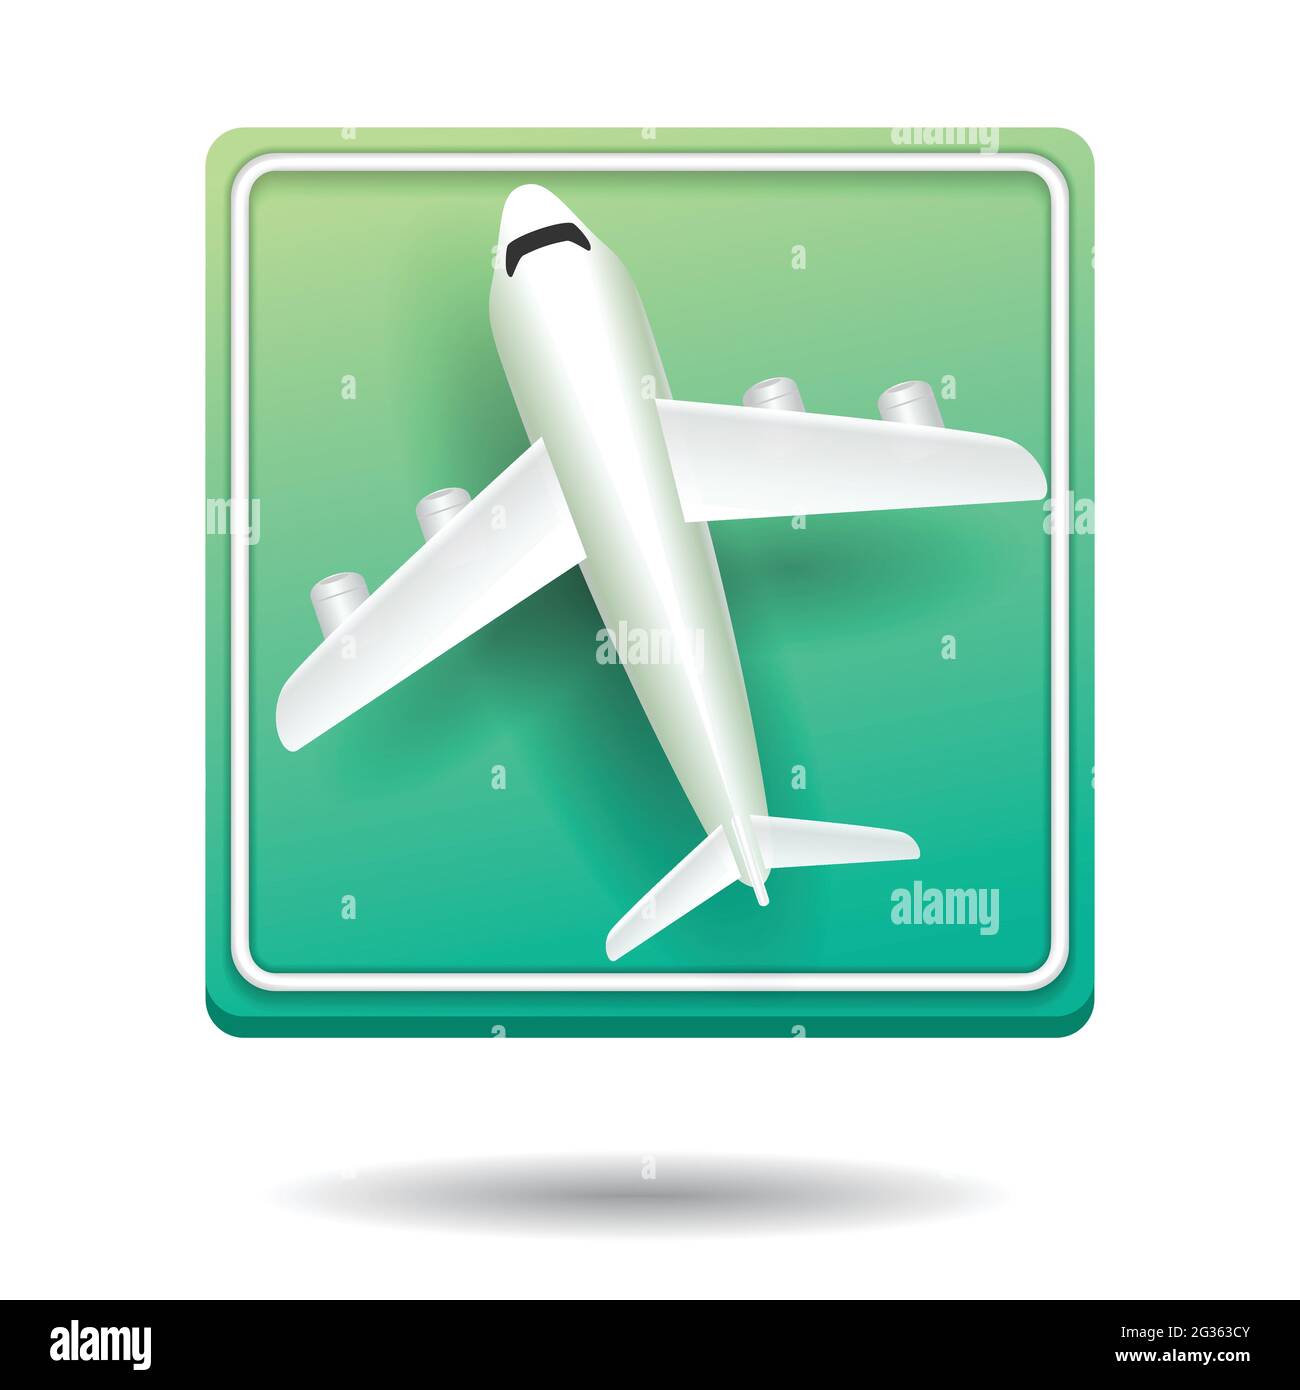 air plane traffic sign 3D rendering icon in front of green rectangle. vector illustration Stock Vector